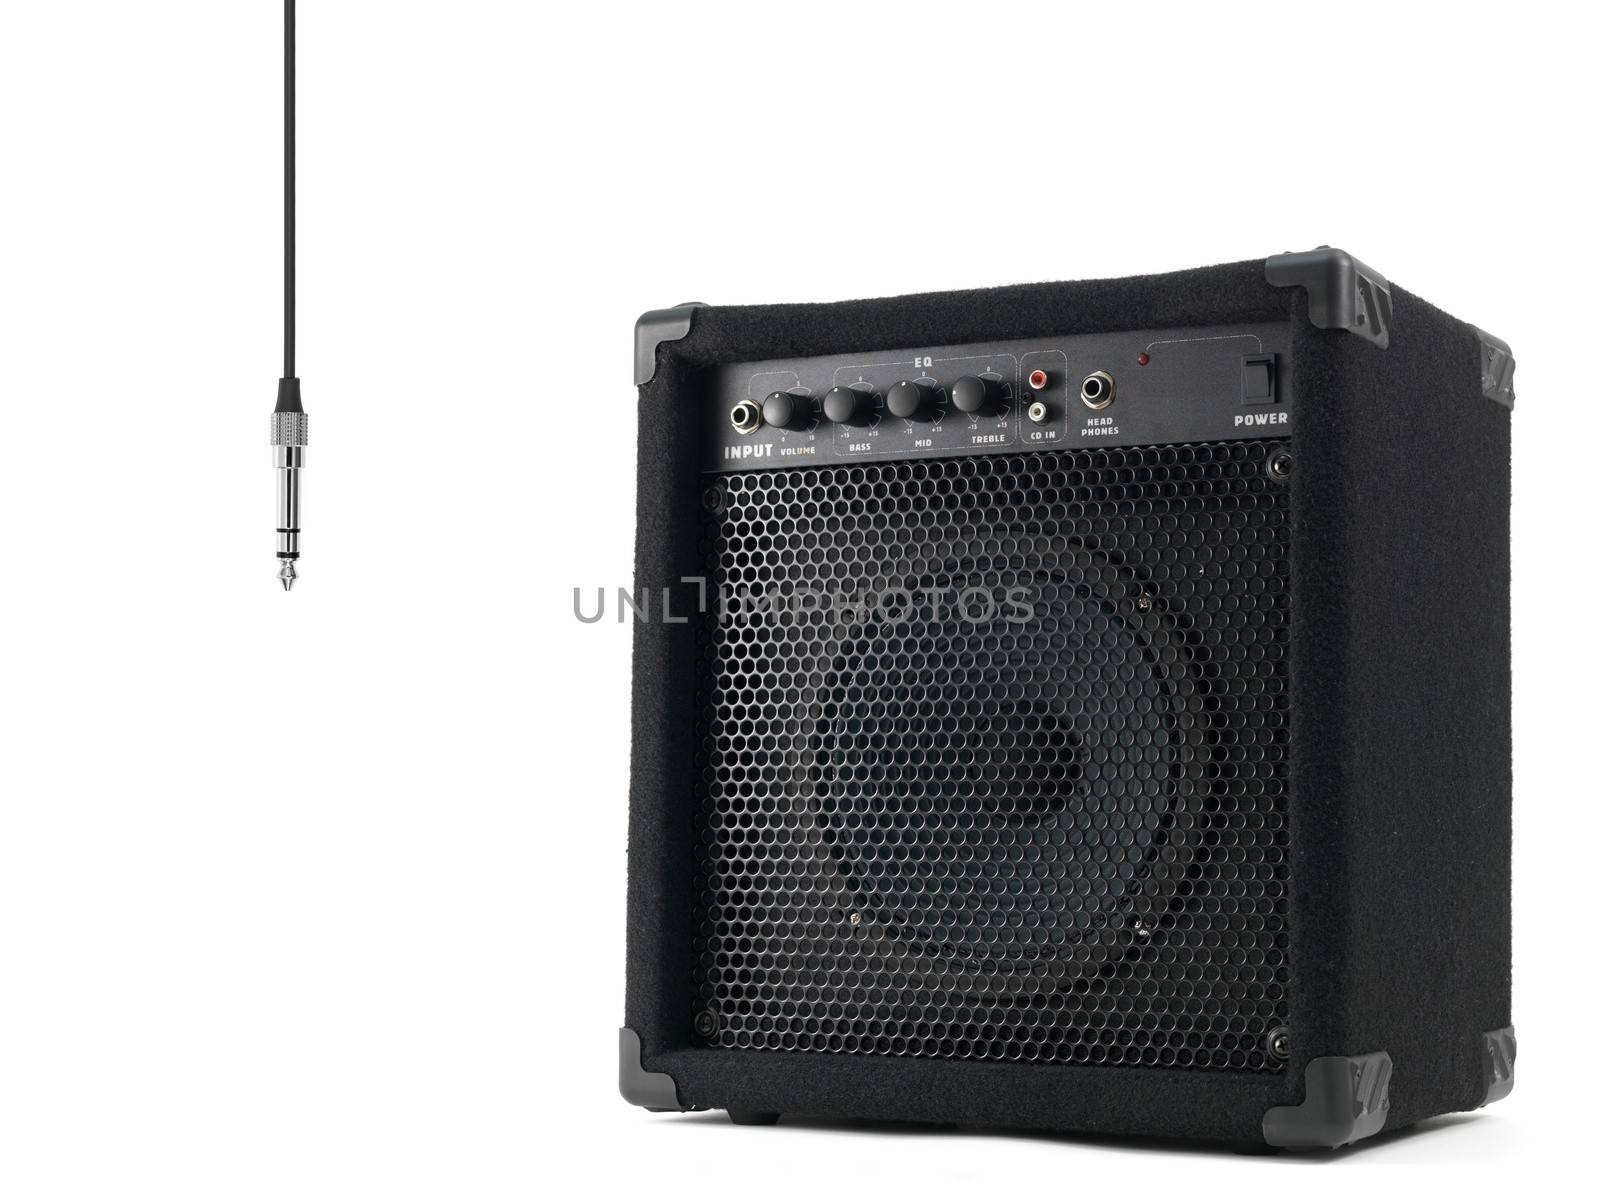 Musical equipment isolated against a plain background